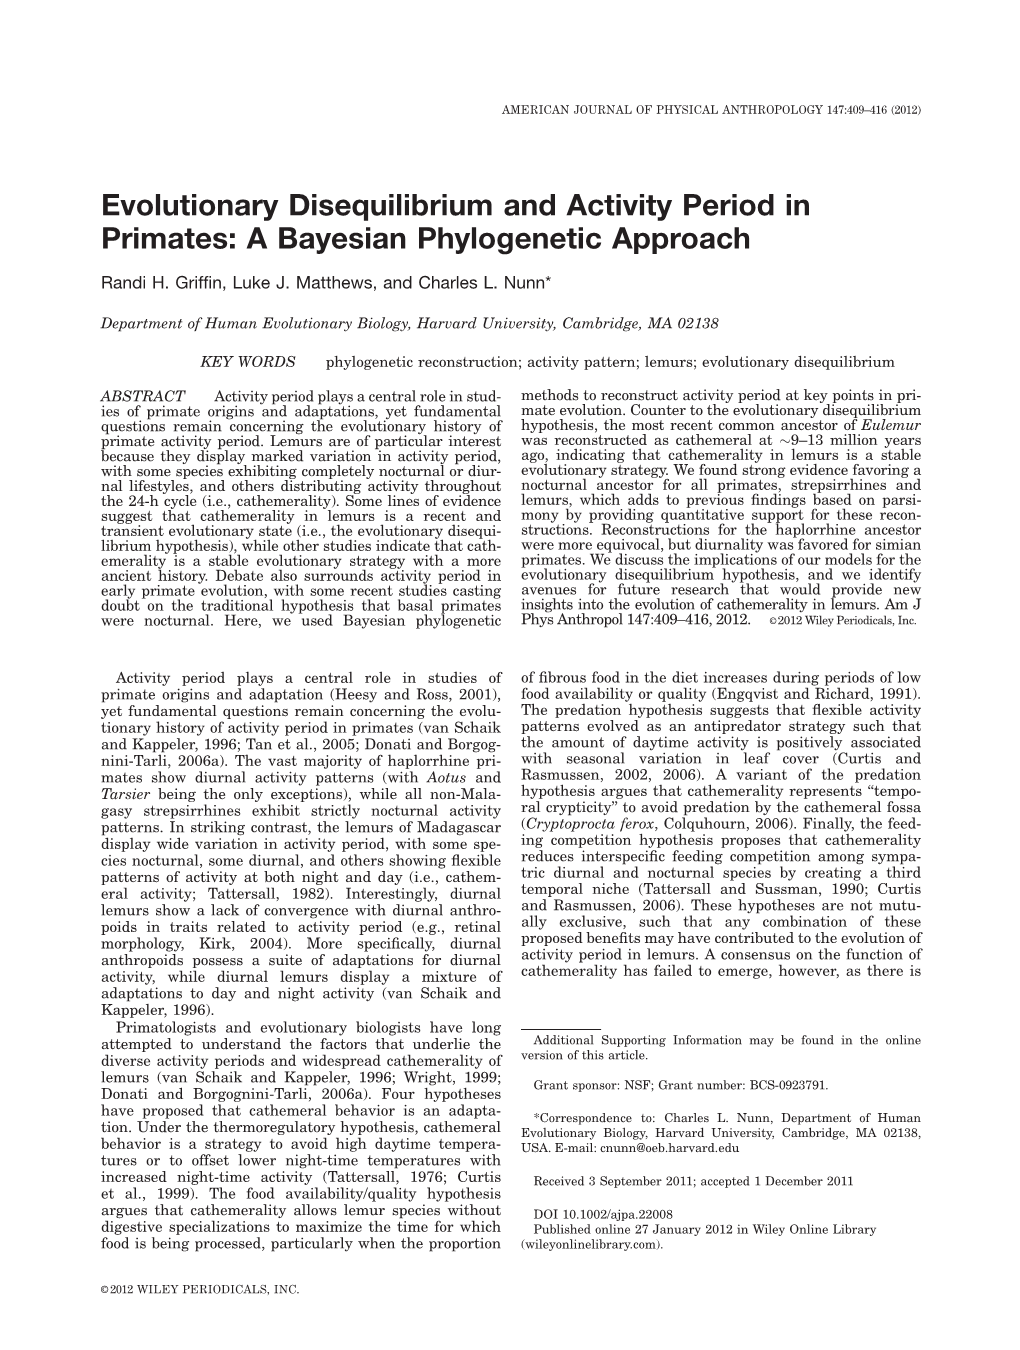 Evolutionary Disequilibrium and Activity Period in Primates: a Bayesian Phylogenetic Approach